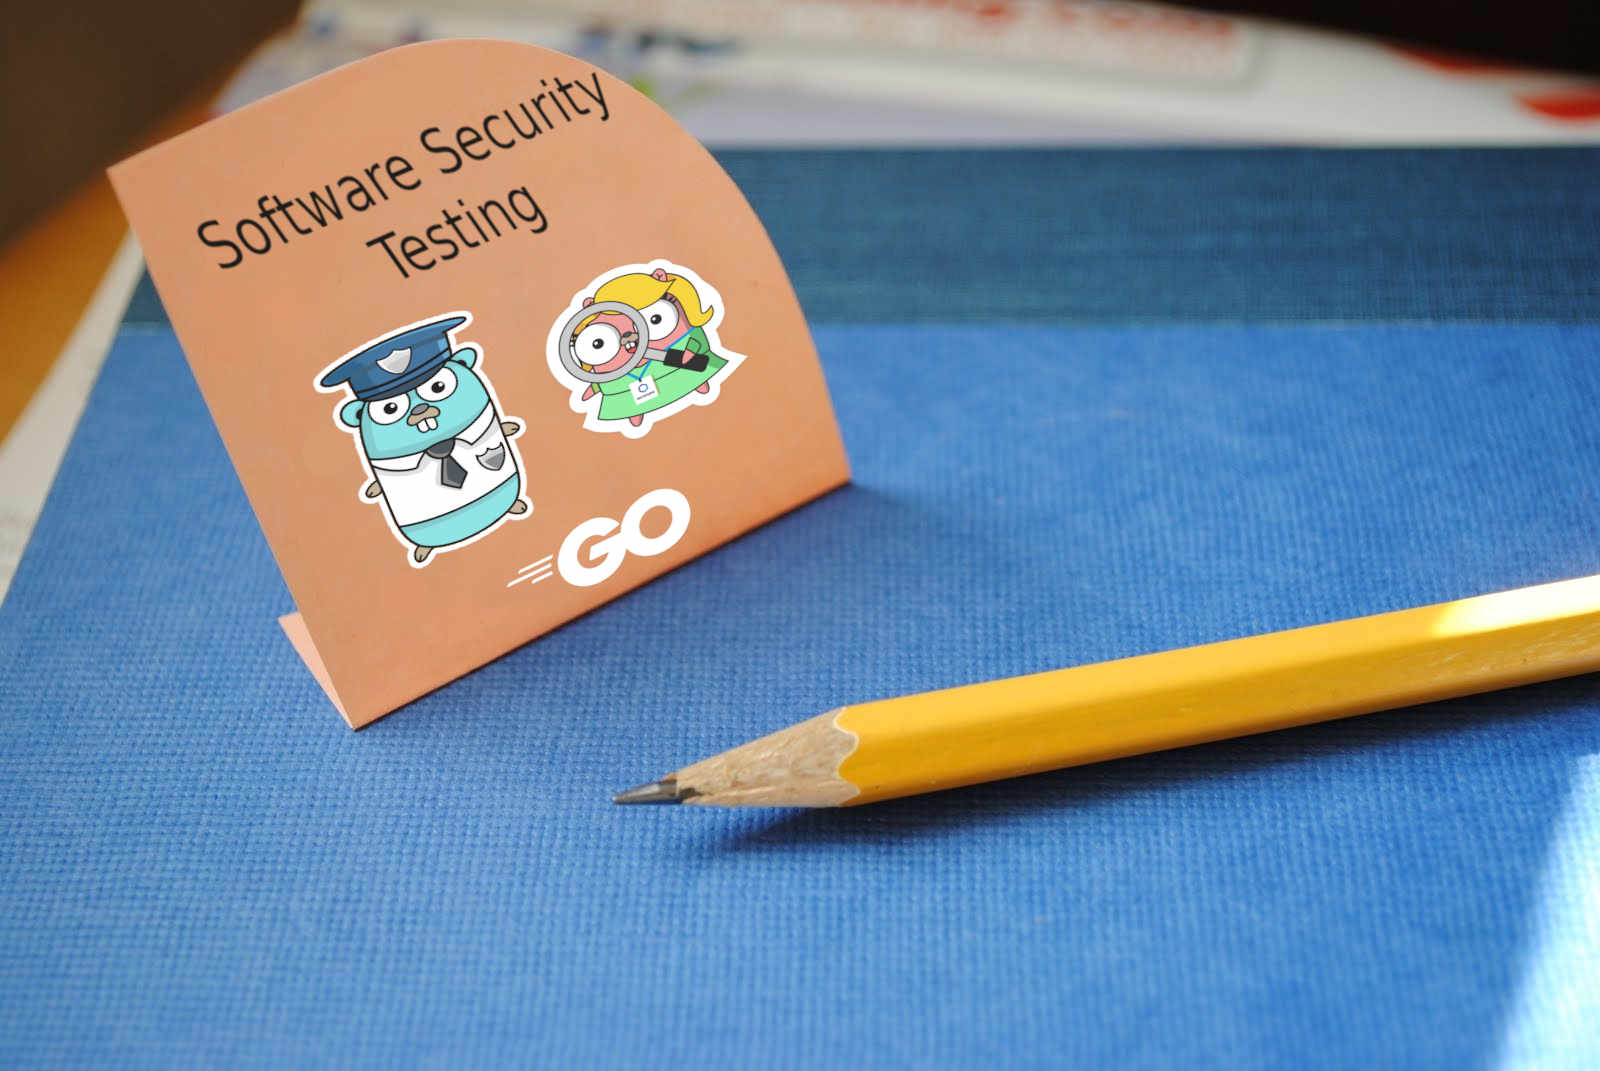 security golang article cover